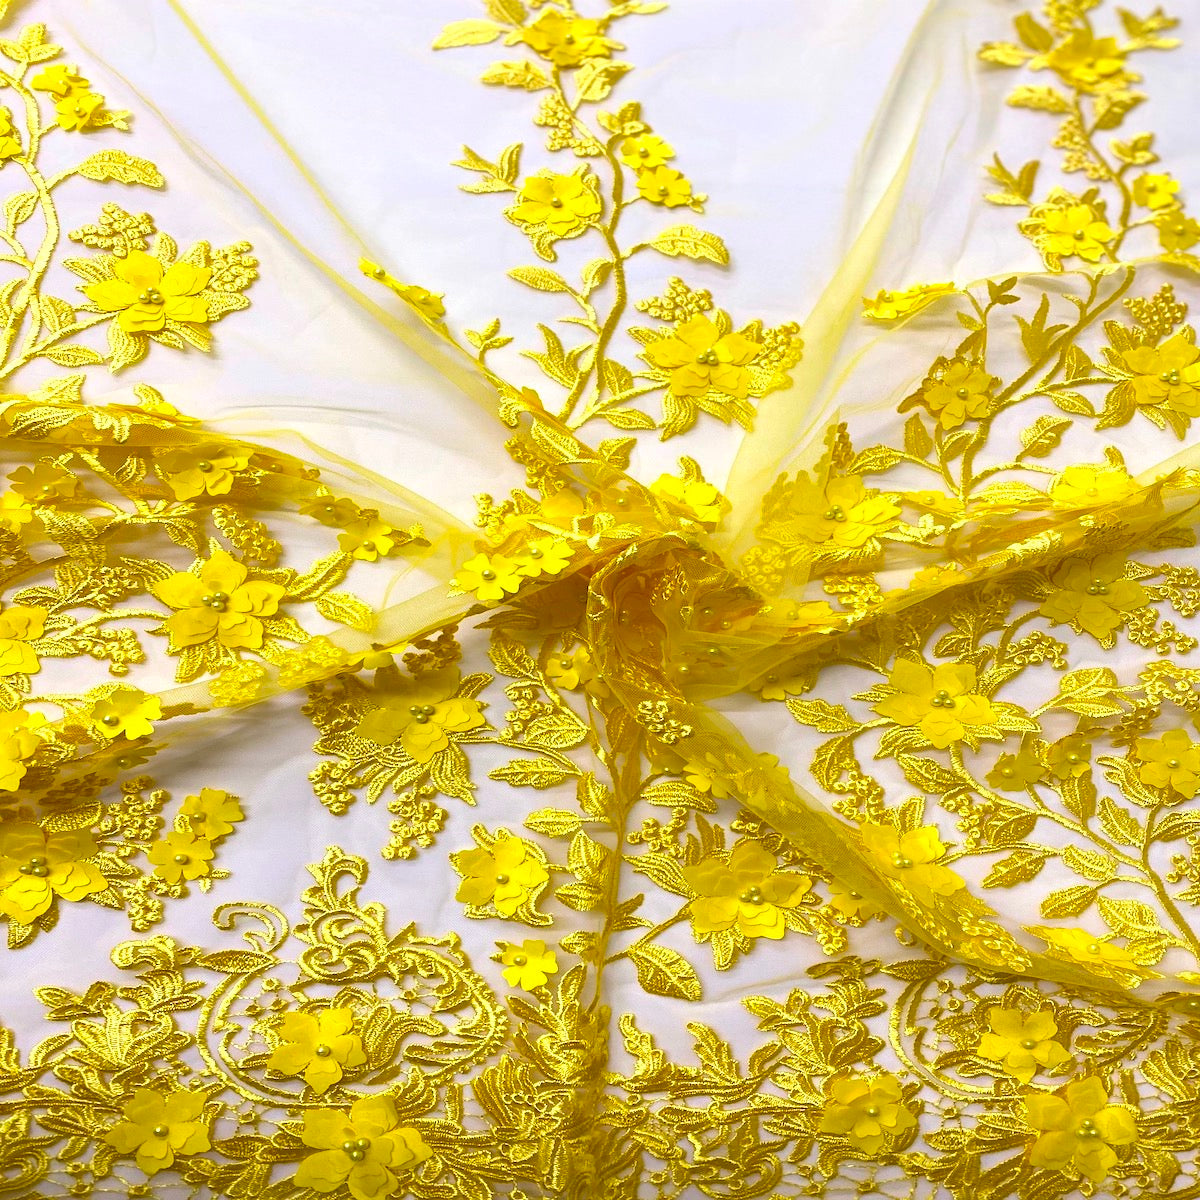 Yellow 3D Embroidered Satin Floral Pearl Lace Fabric - Fashion Fabrics LLC